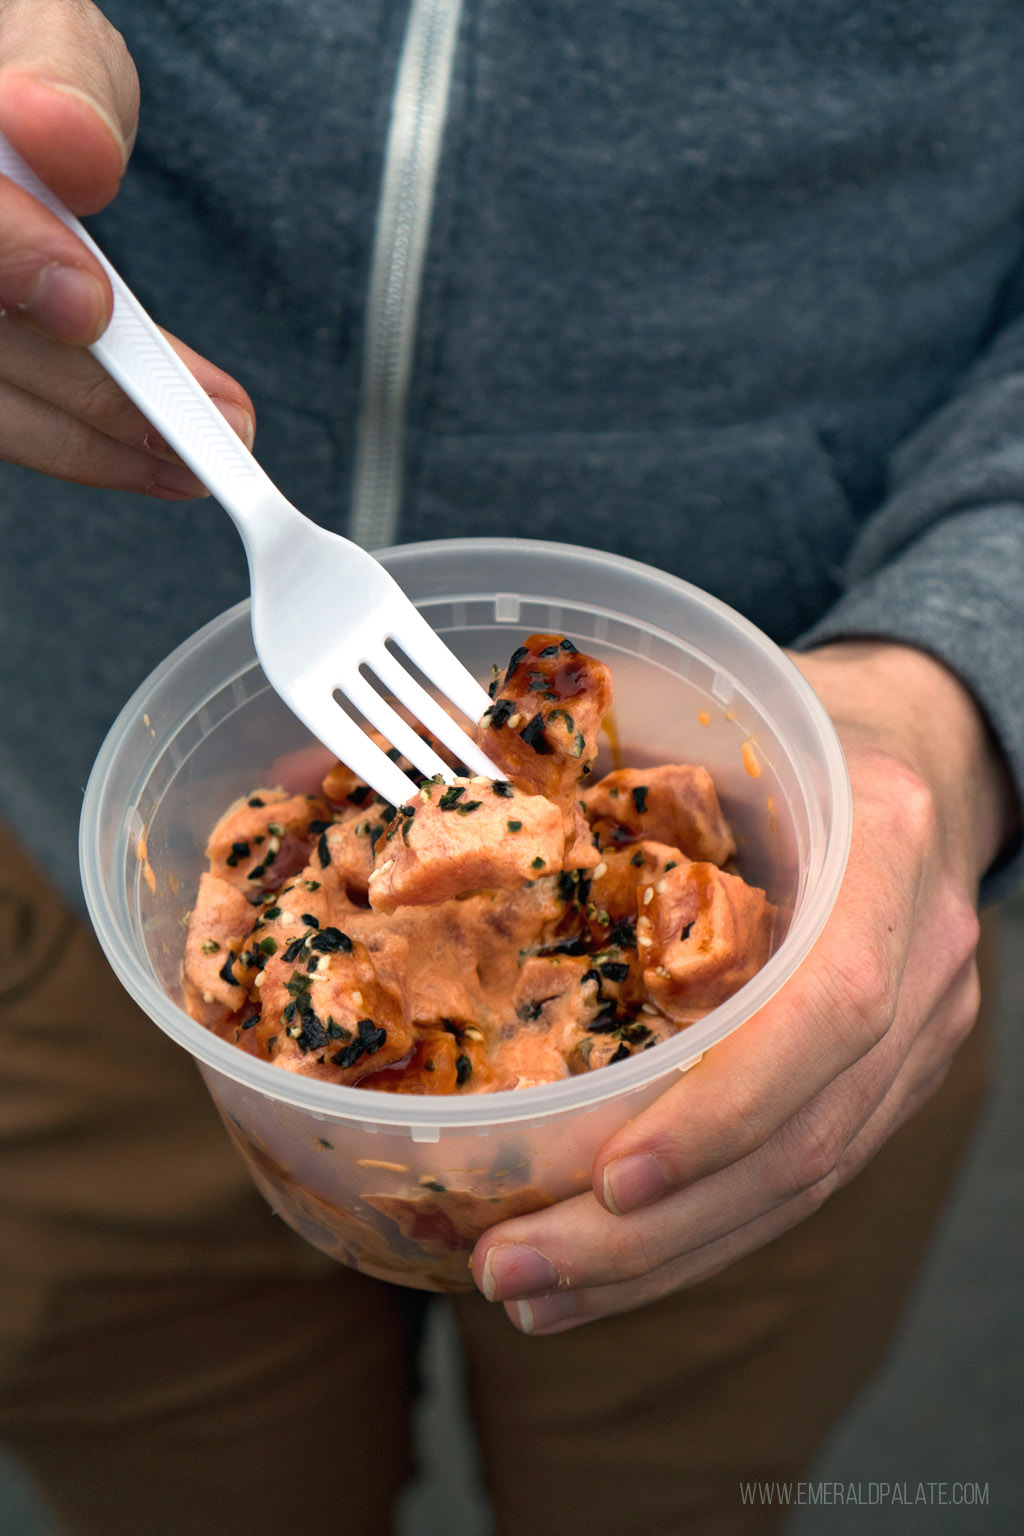 person picking up poke out of a takeout container